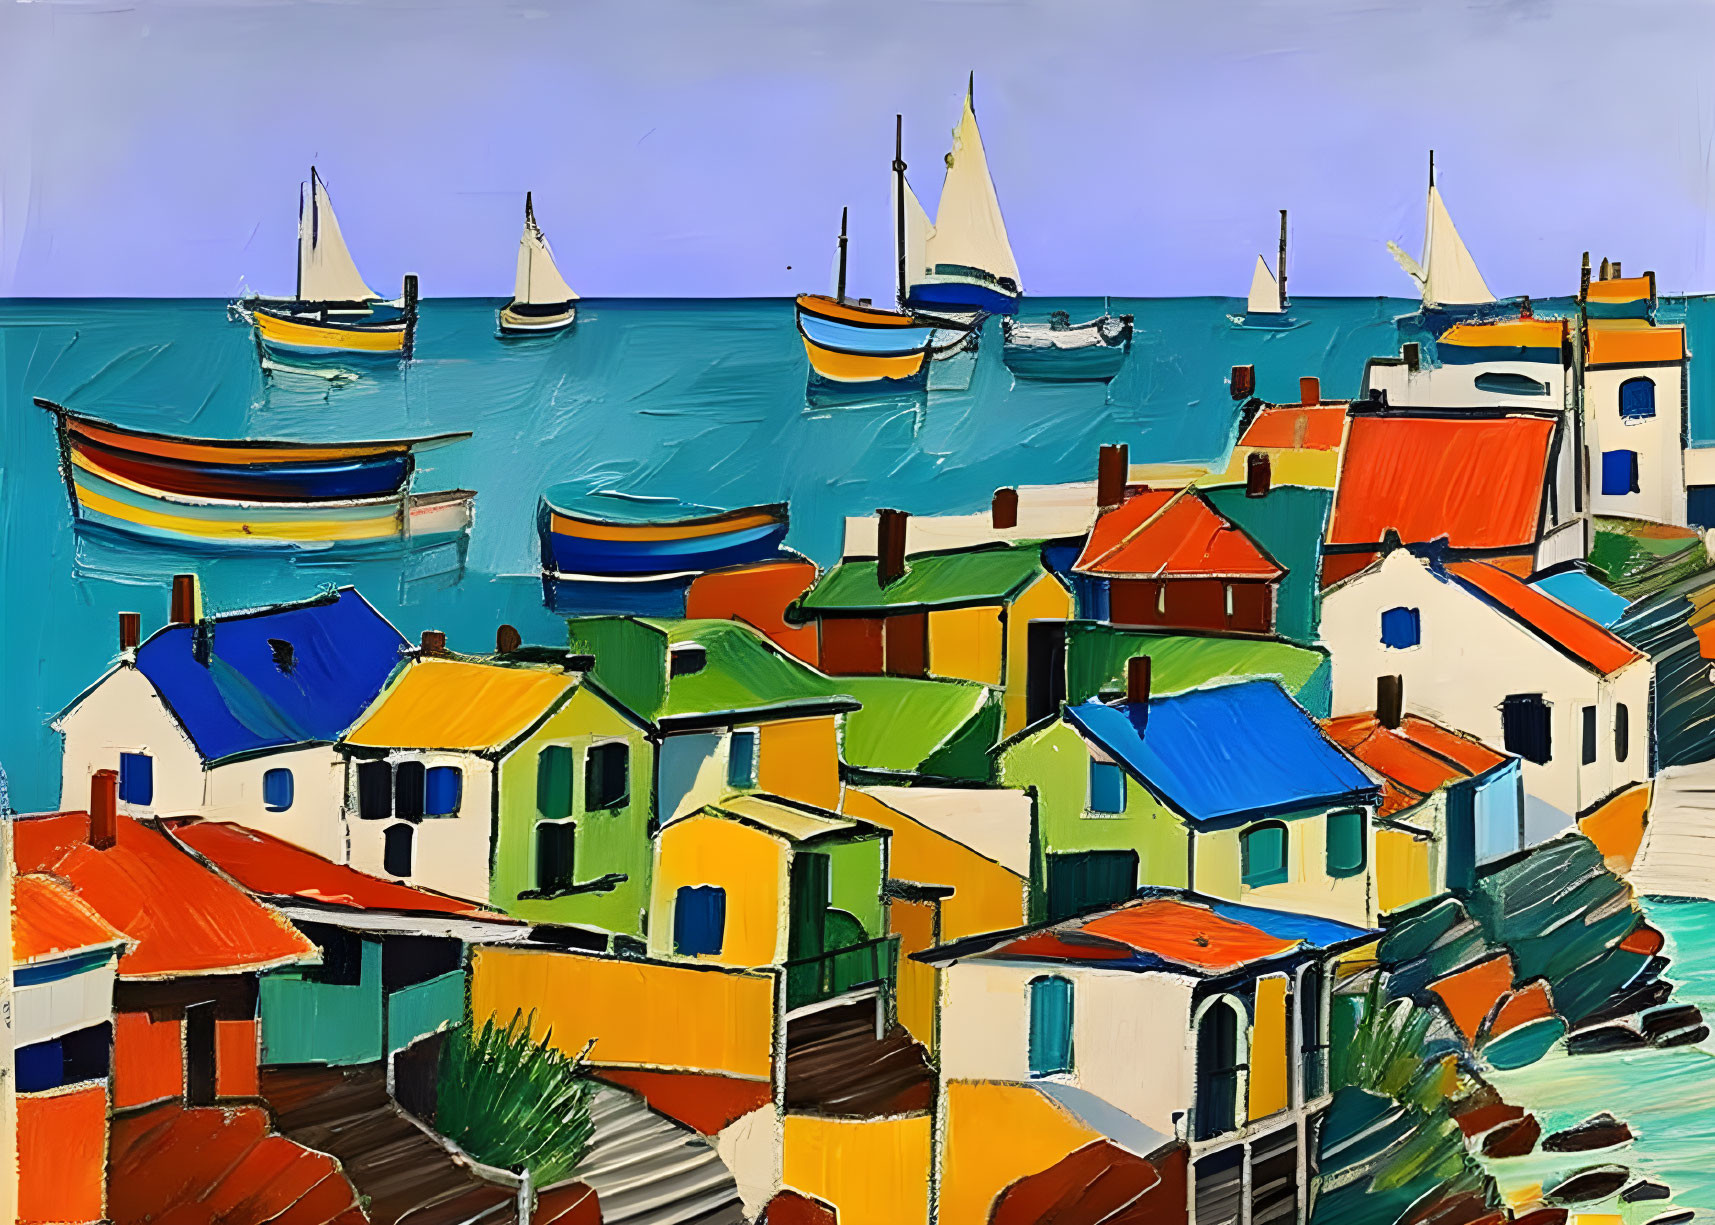 Colorful Coastal Village: Vibrant Oil Painting of Houses and Boats